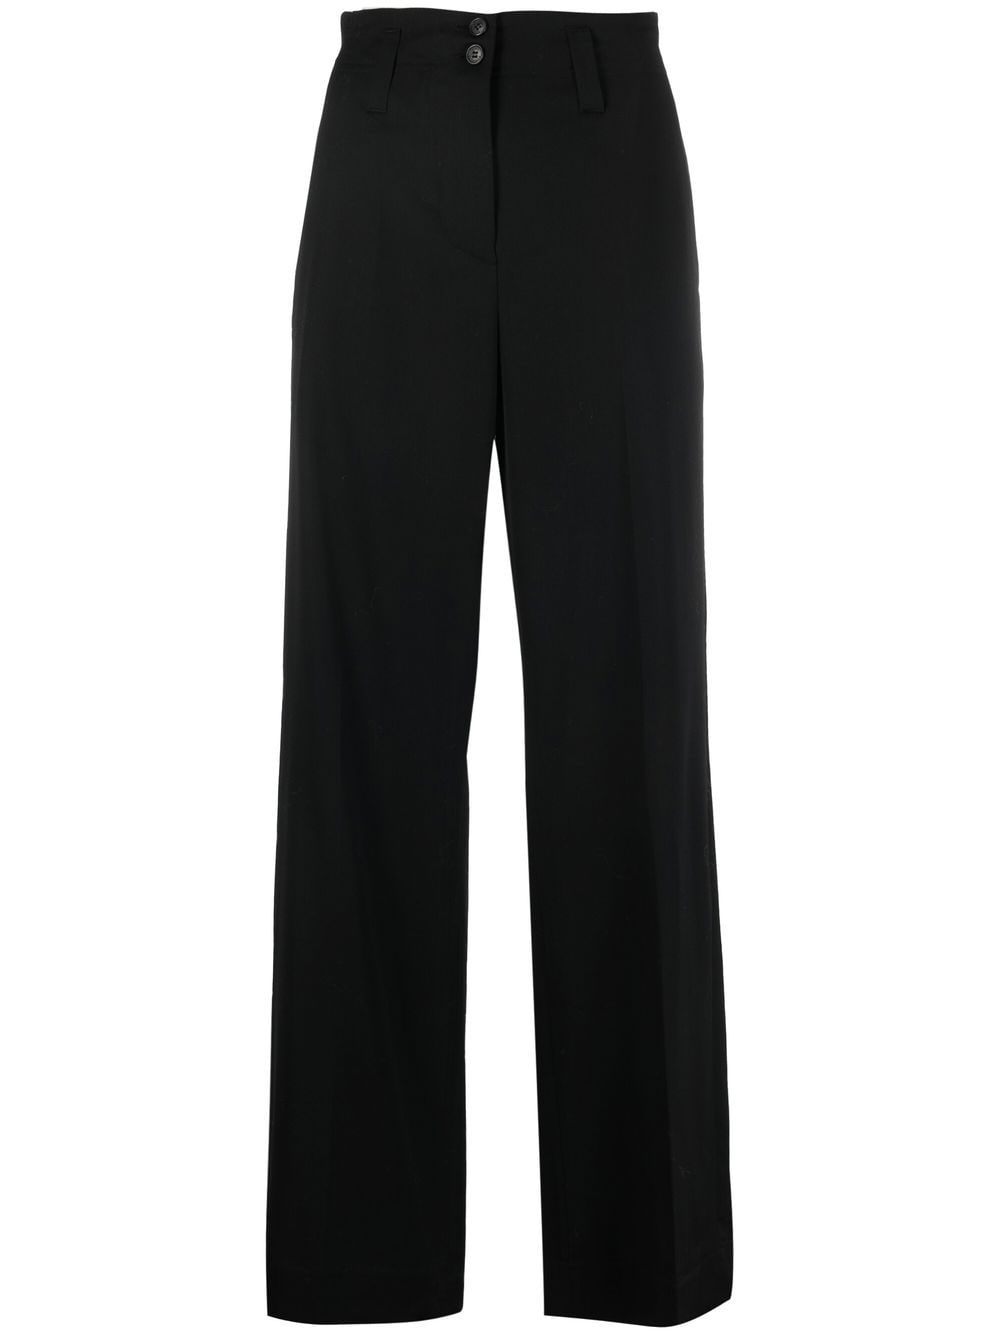 ISABEL BENENATO WIDE-LEG HIGH-WAISTED TROUSERS